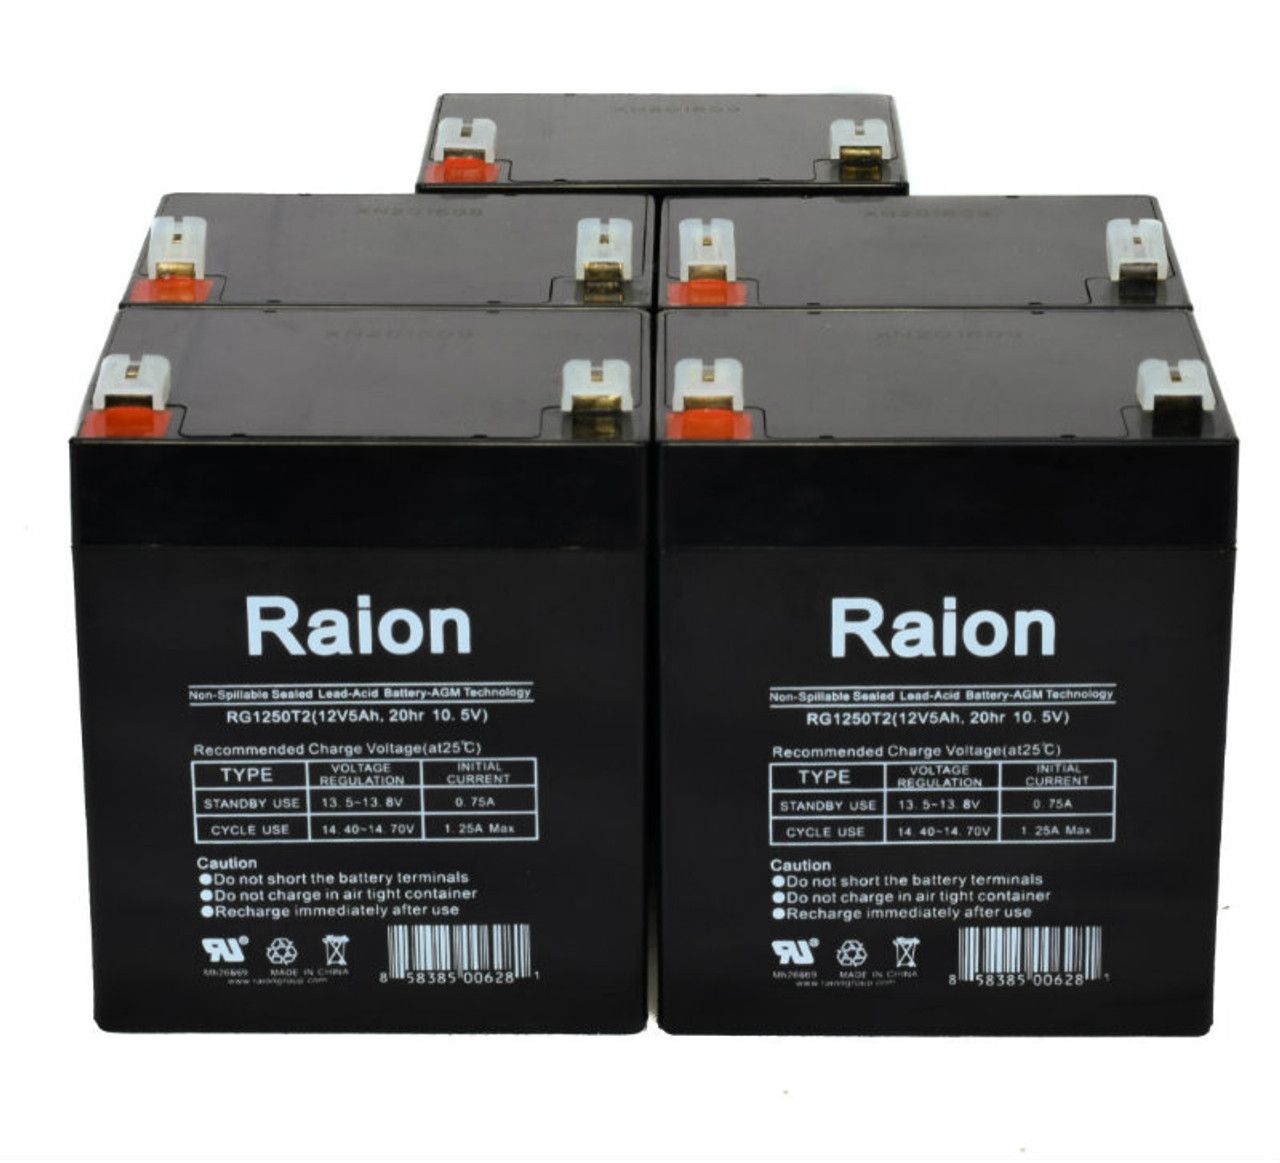 Raion Power 12V 5Ah RG1250T2 Replacement Lead Acid Battery for Motoma MS12V4 - 5 Pack